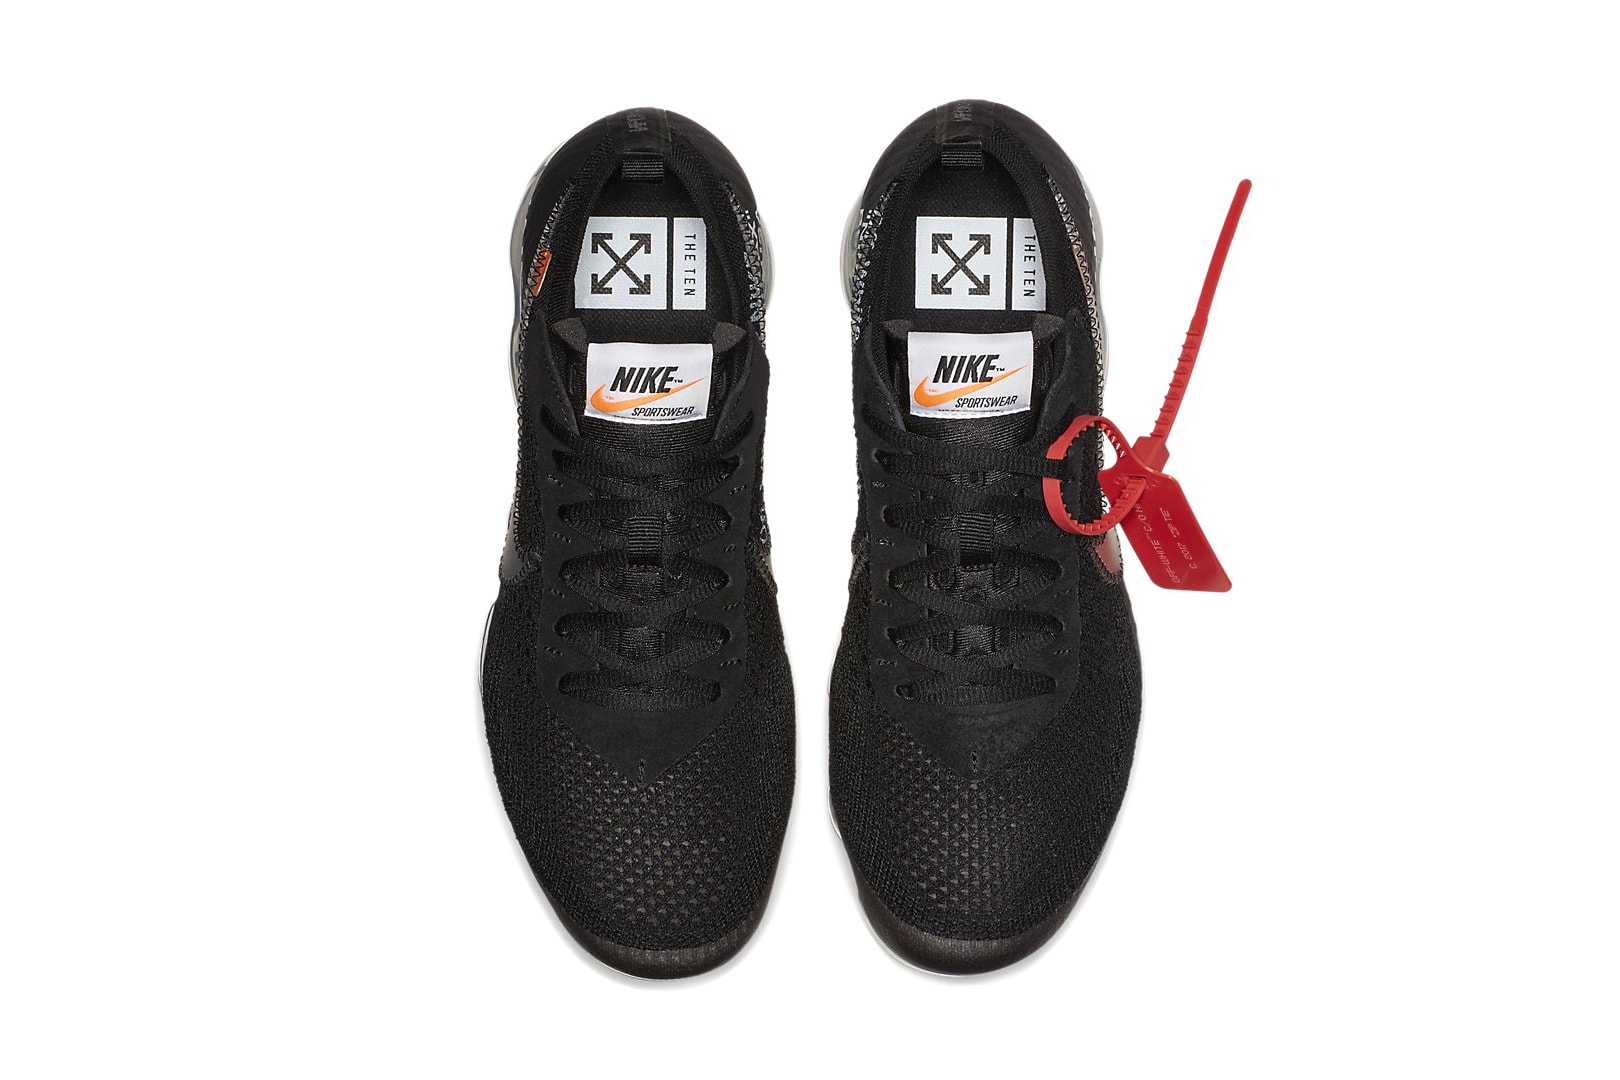 Virgil Abloh Nike Air VaporMax Official Images Off White footwear march 2018 release date nike sportswear